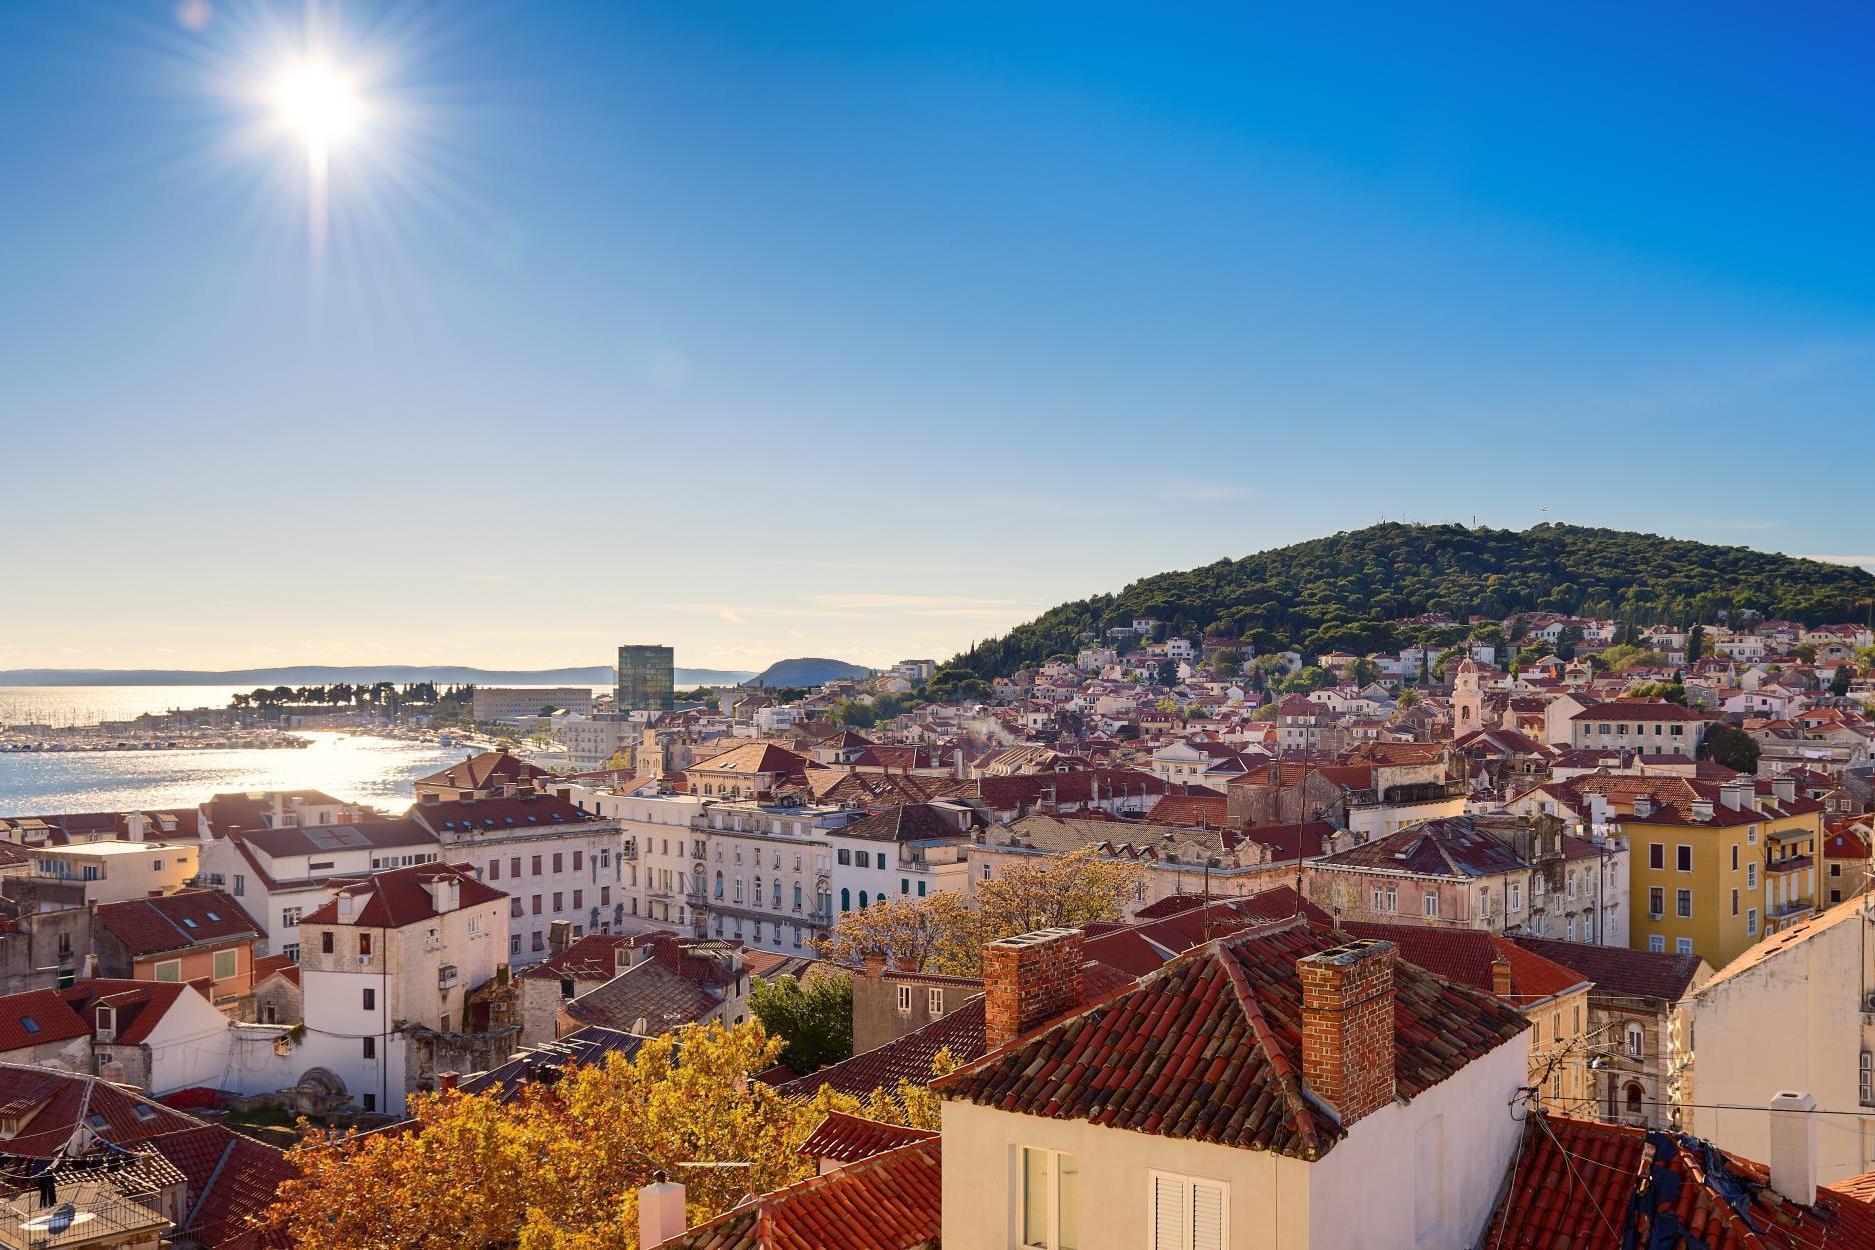 Independent: Win a trip to Croatia